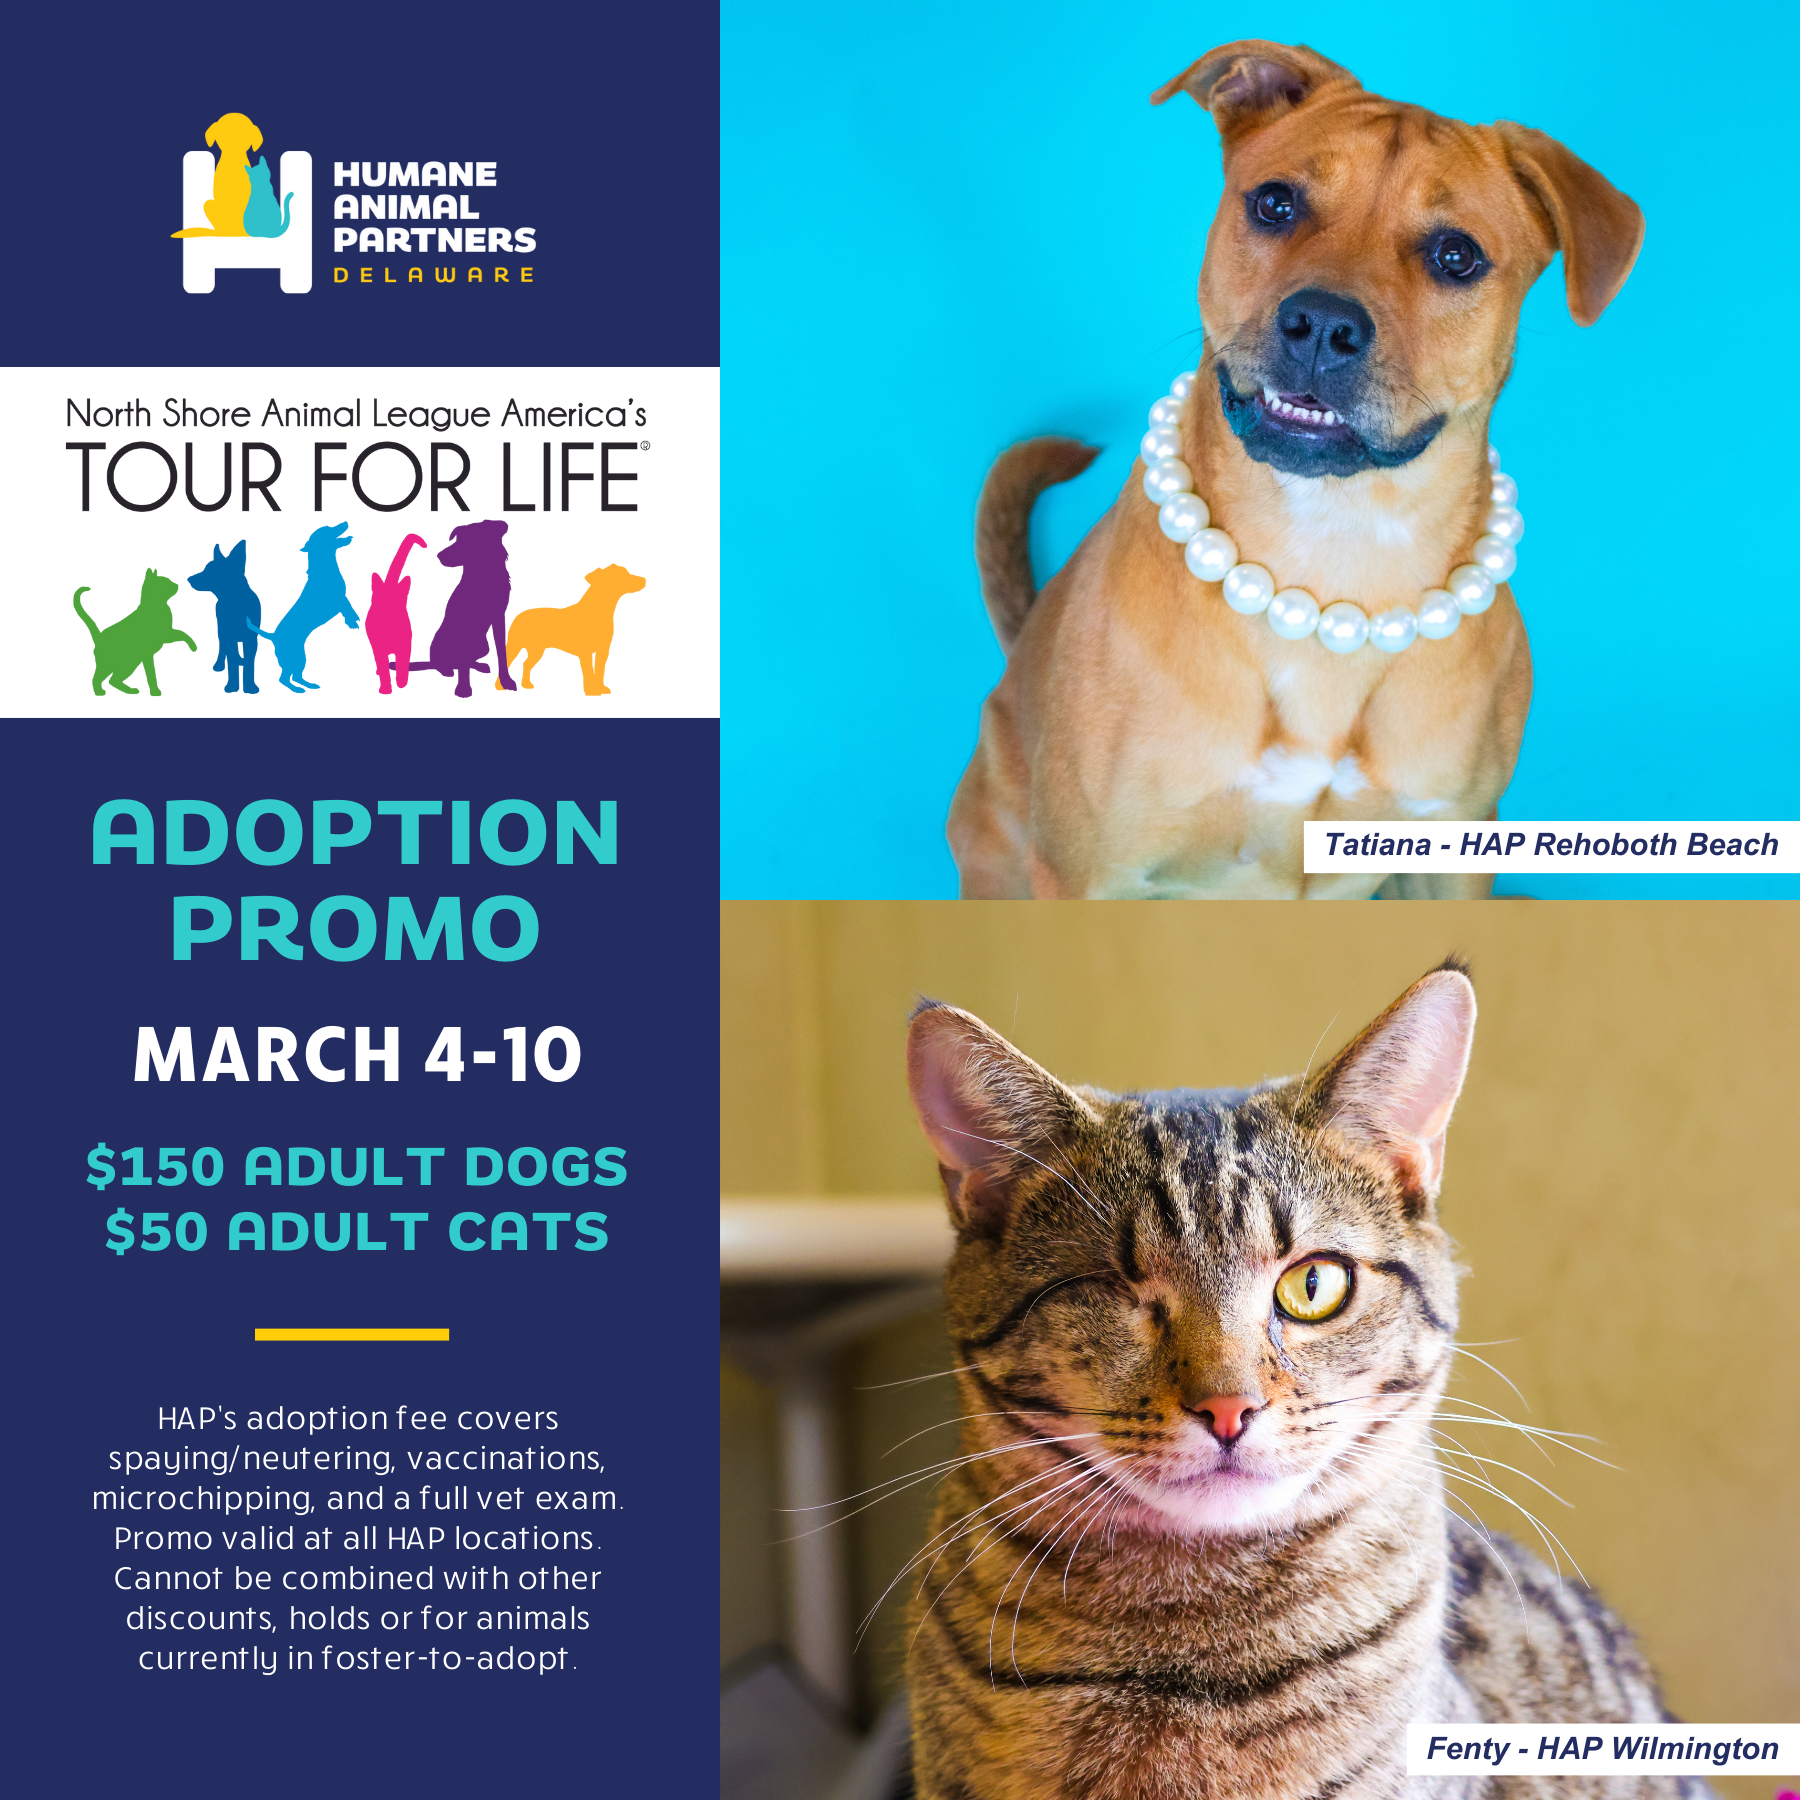 HUMANE ANIMAL PARTNERS JOINS NORTH SHORE ANIMAL LEAGUE AMERICA TO KICK OFF 2024 TOUR FOR LIFE